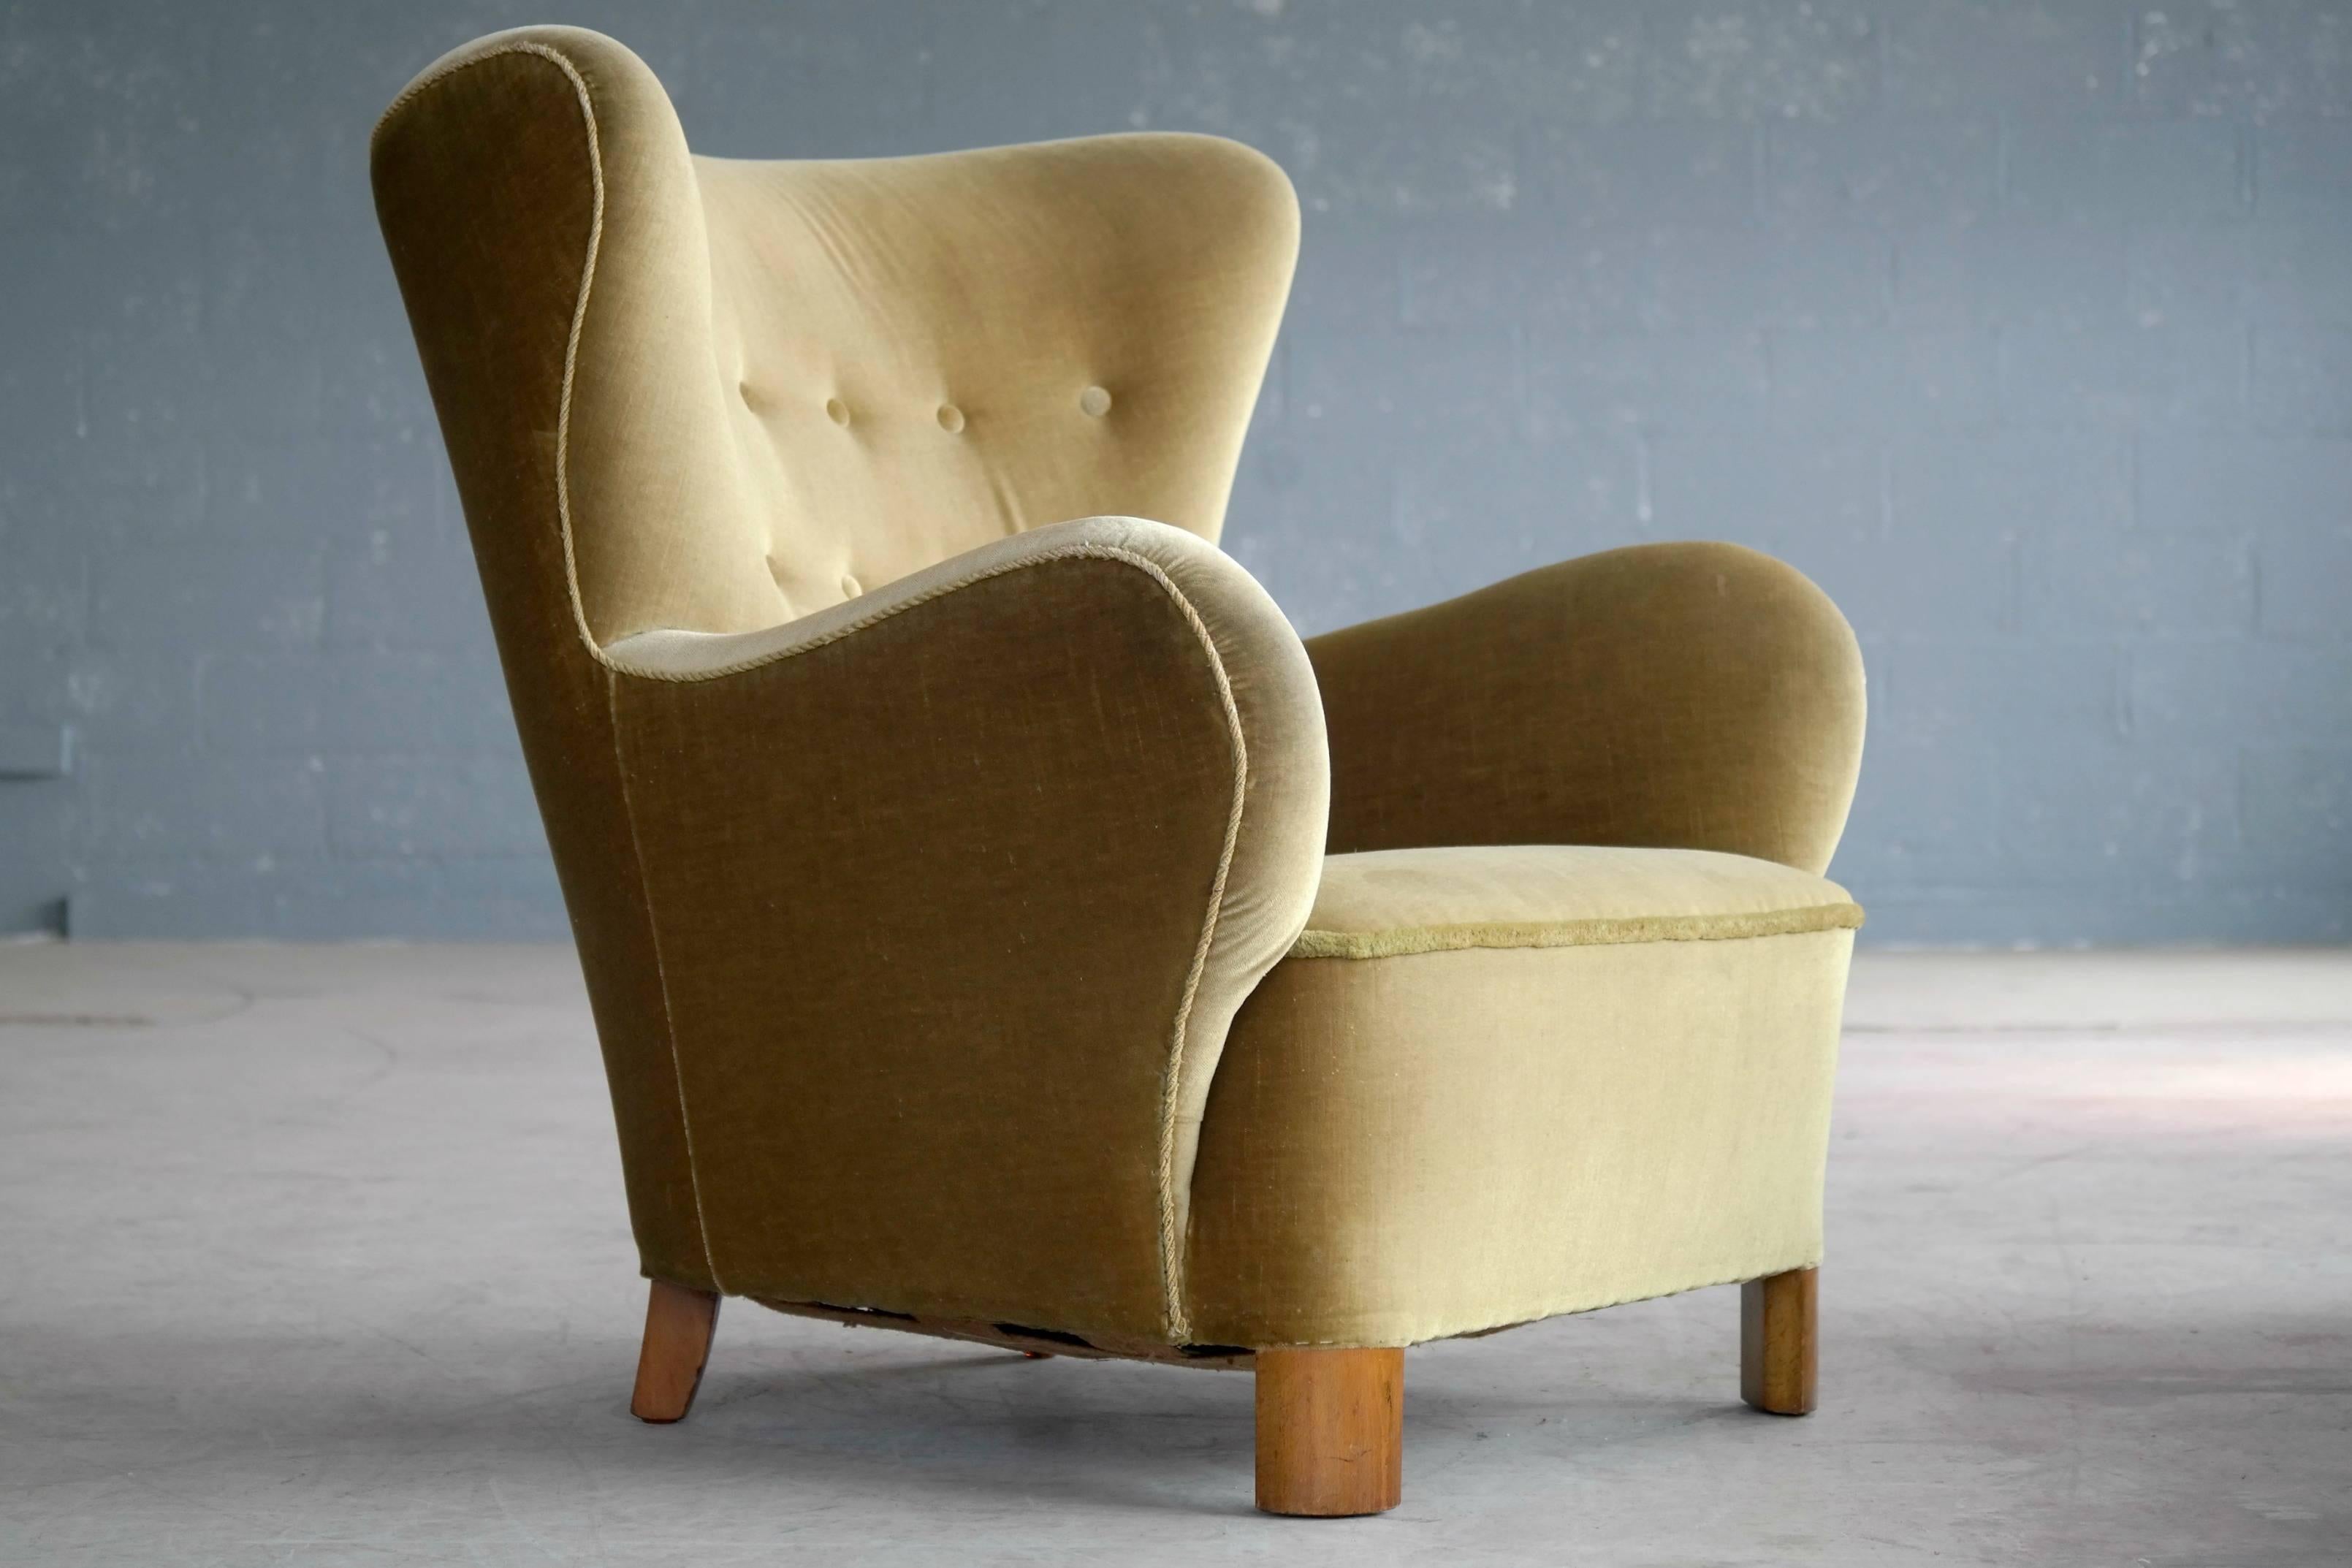 Fantastic Flemming Lassen style armchair with a yellowish brown mohair fabric. The chair has all the right design cues in regards of being a Lassen chair except for the front legs that are slightly thicker than for is generally accepted as Lassen.